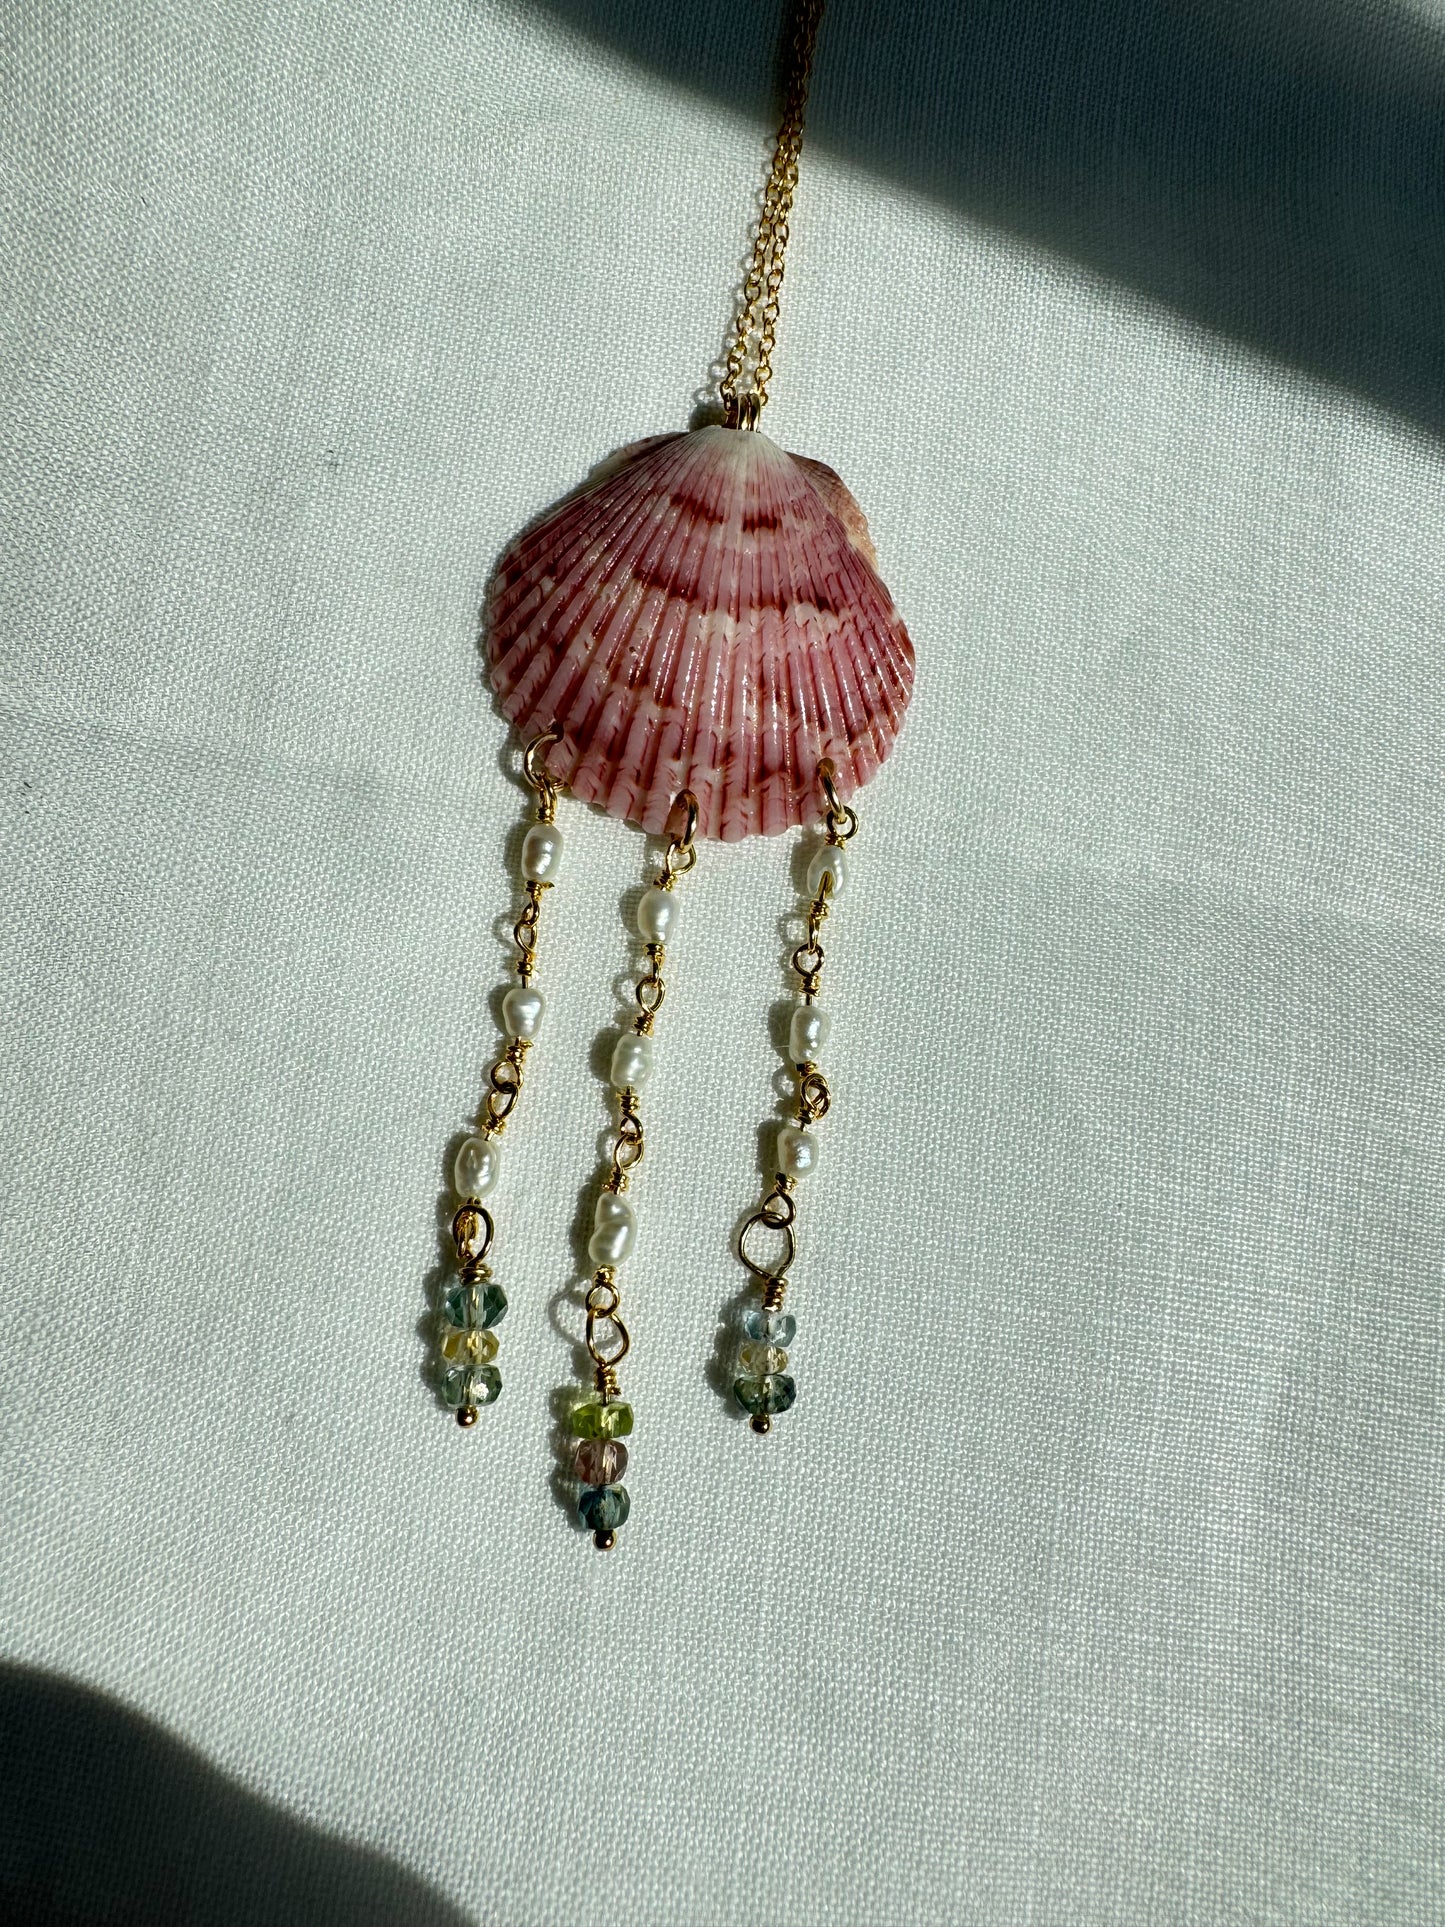 Shell Necklace #7